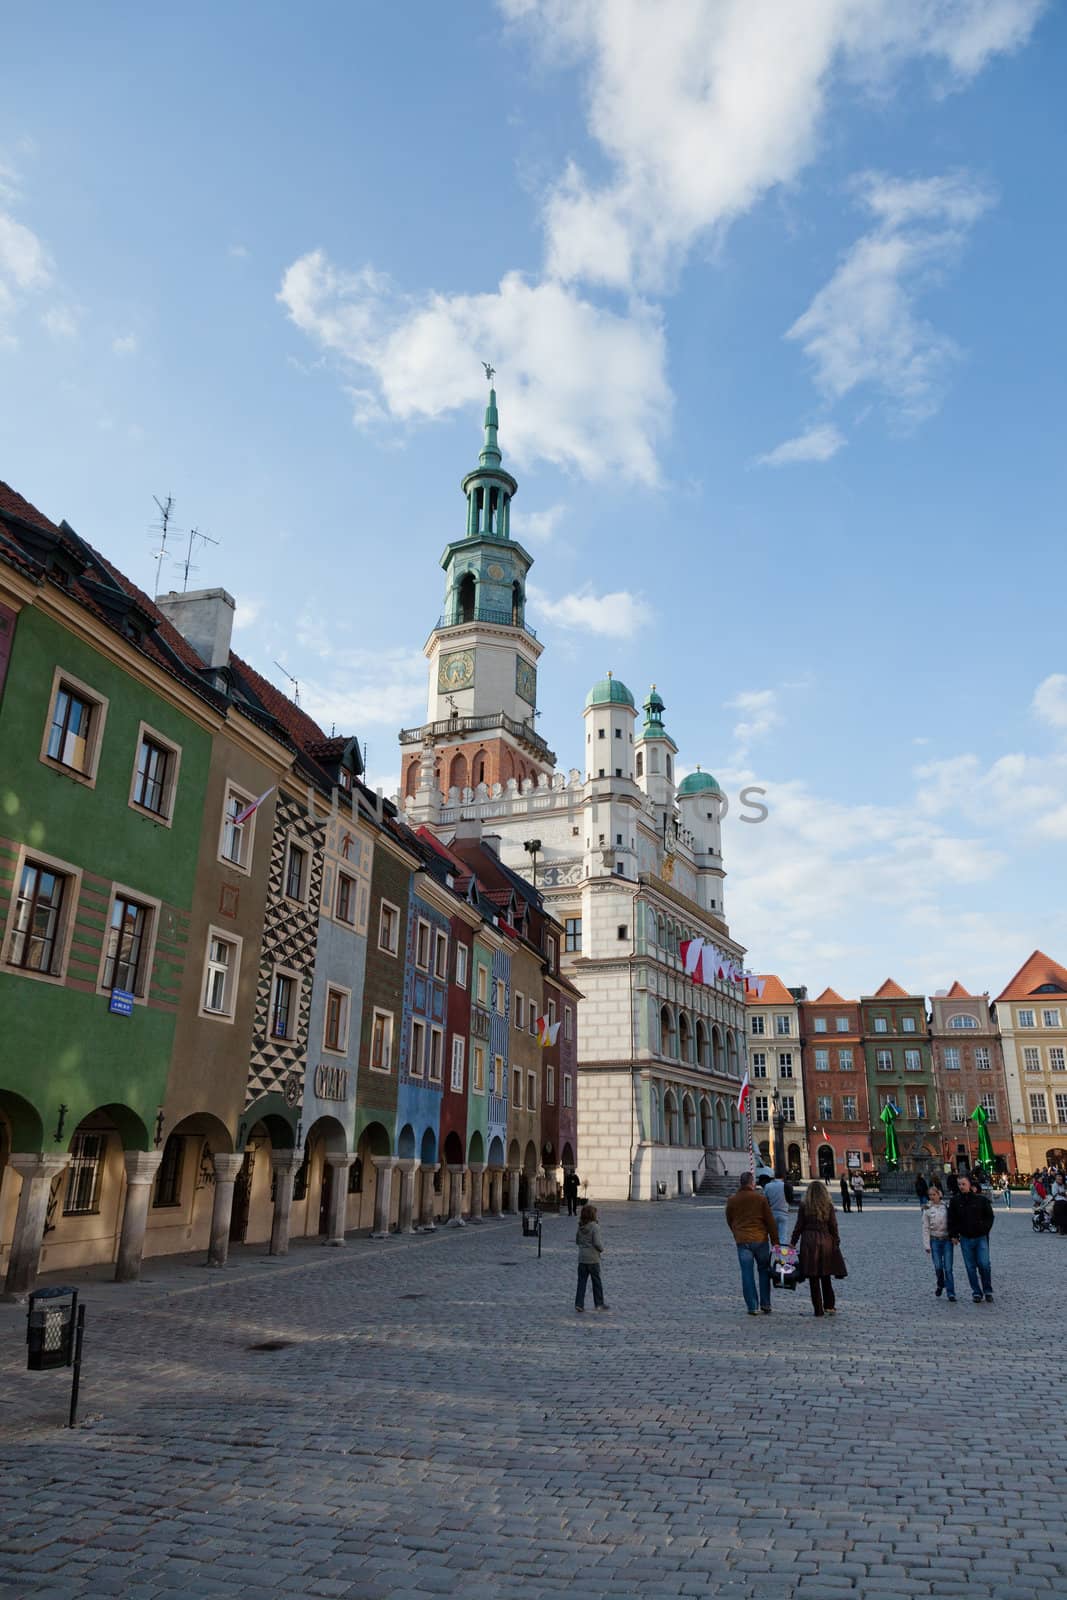 The central square of the city established in 1253 is the third biggest in Poland